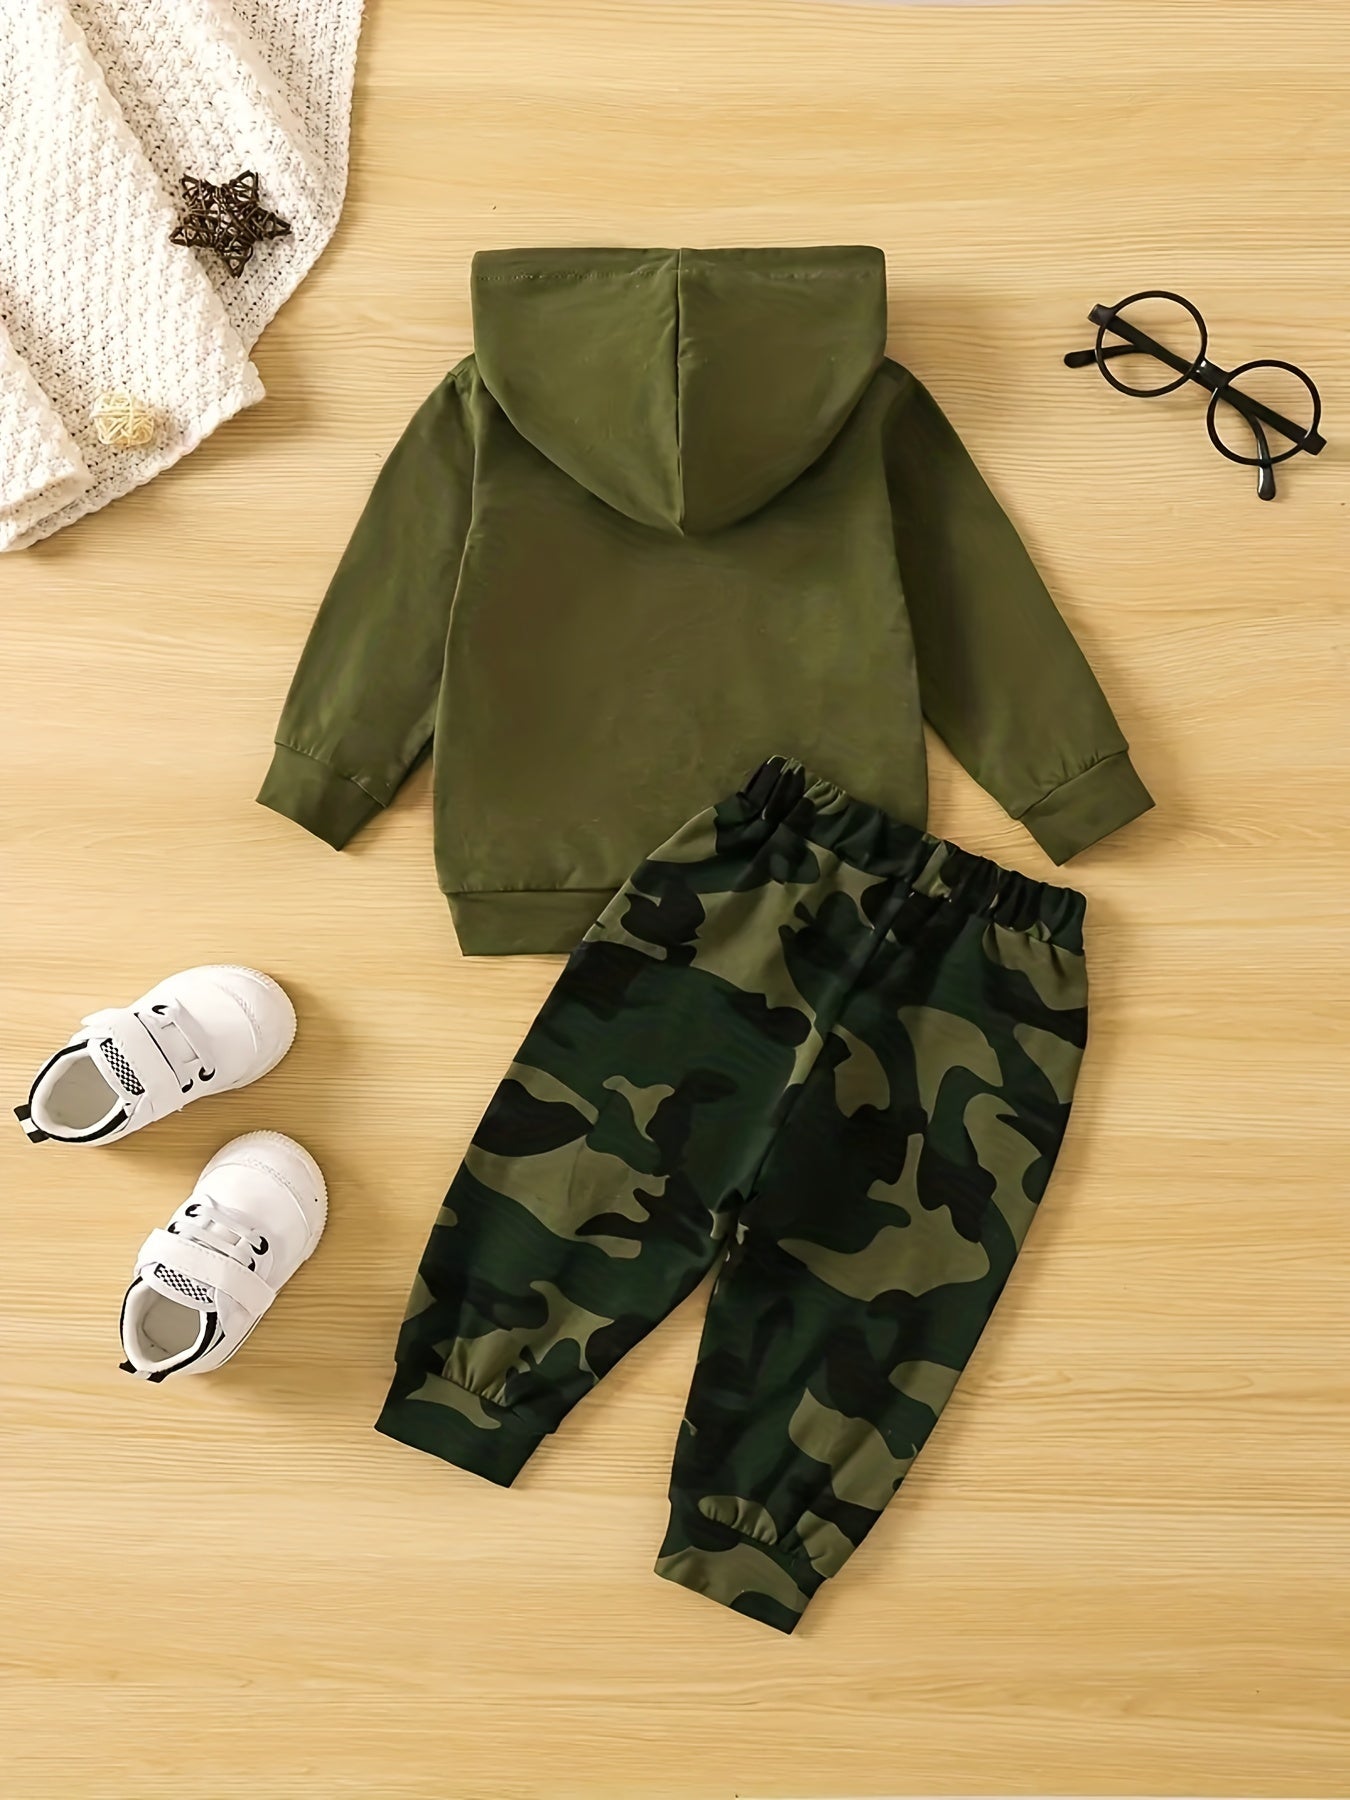 Baby Boys Casual & Stylish Outfit - Hooded Long Sleeve Top + Camo Pants Set